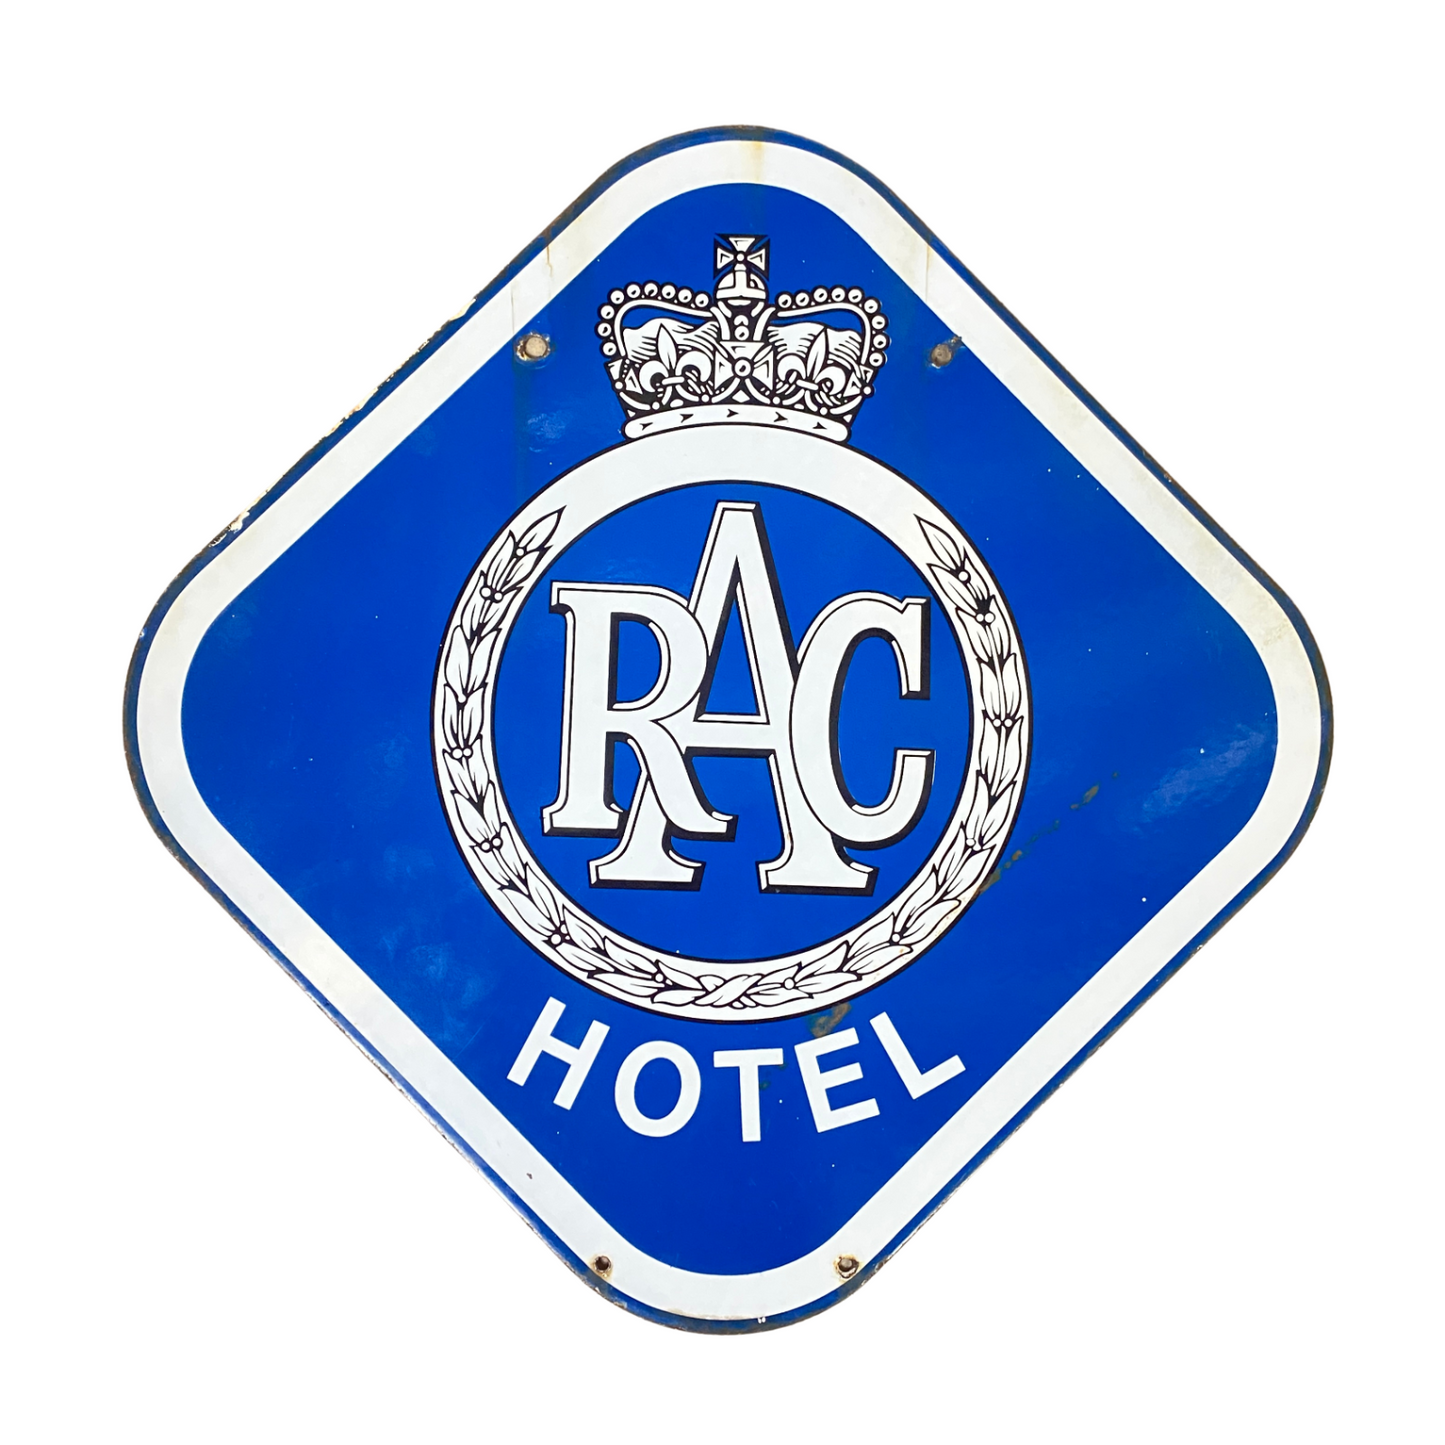 RAC Royal Automobile Club Hotel Porcelain Double Sided Sign